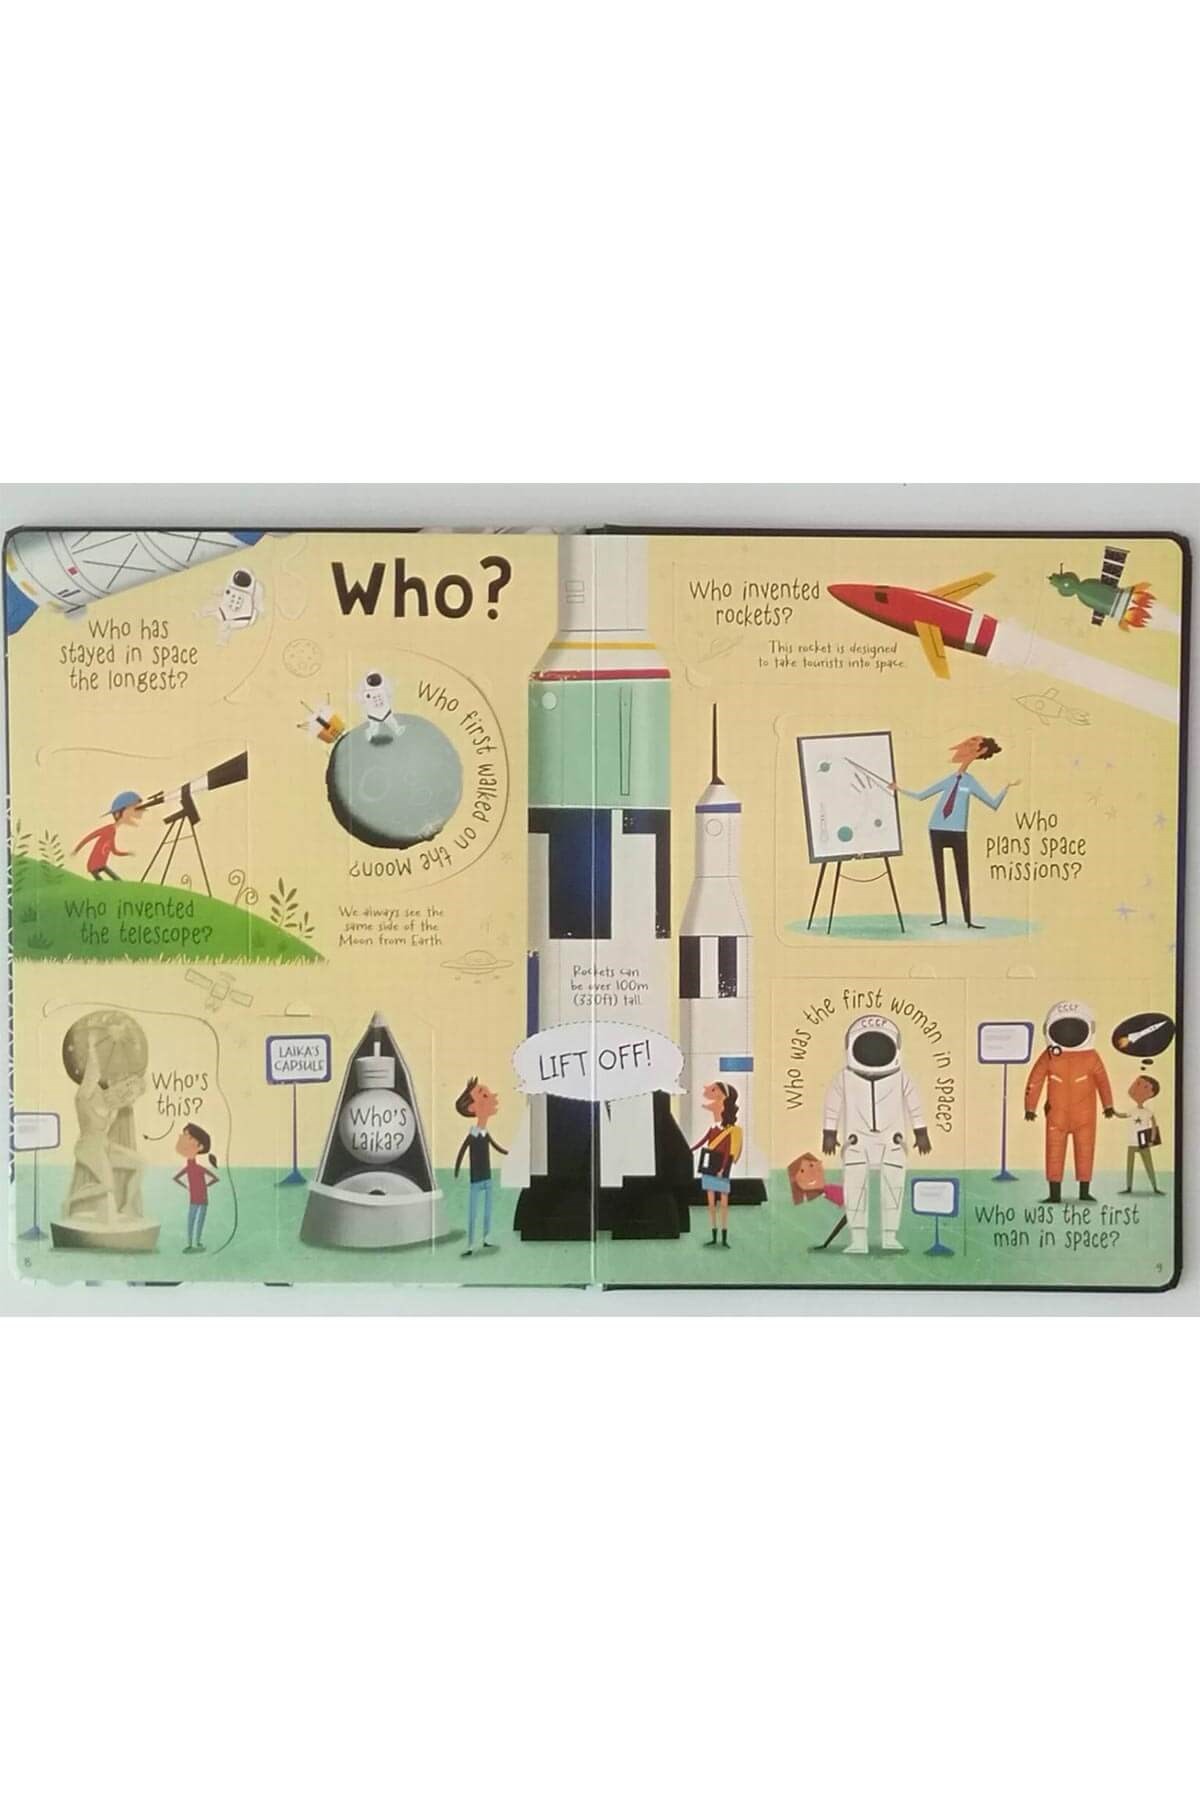 The Usborne Lift-The-Flap Questions and Answers About Space